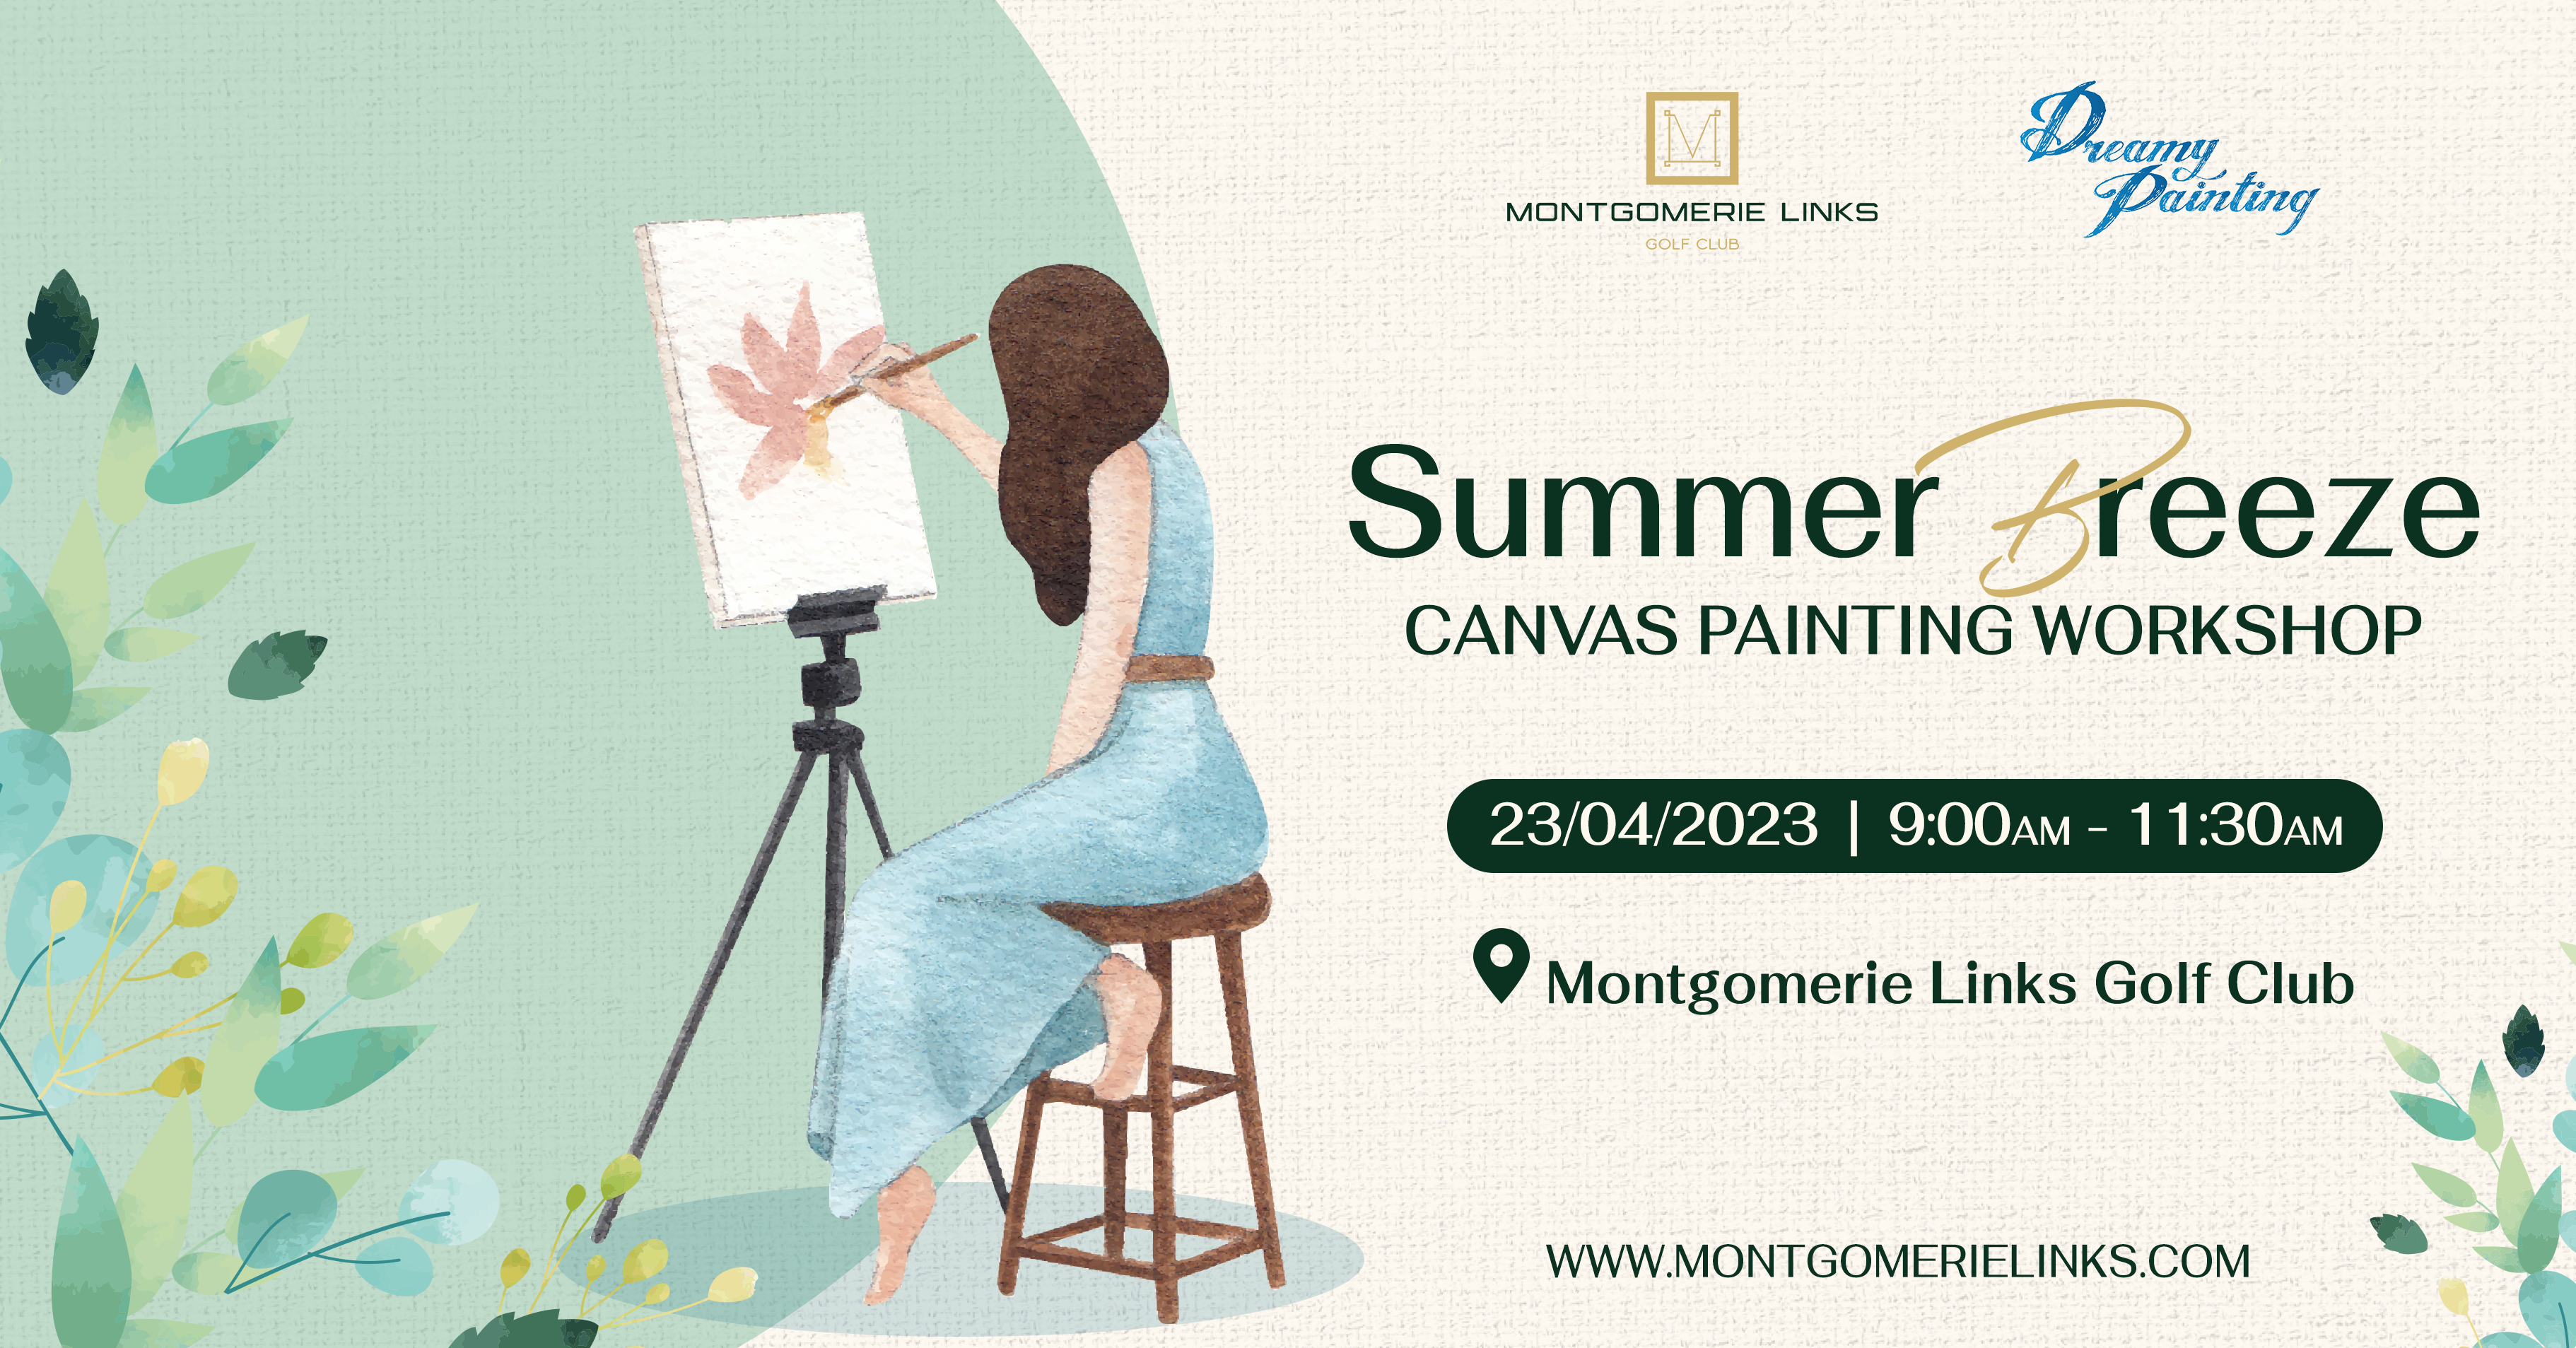 CANVAS PAINTING WORKSHOP “SUMMER BREEZE” AT MONTGOMERIE LINKS